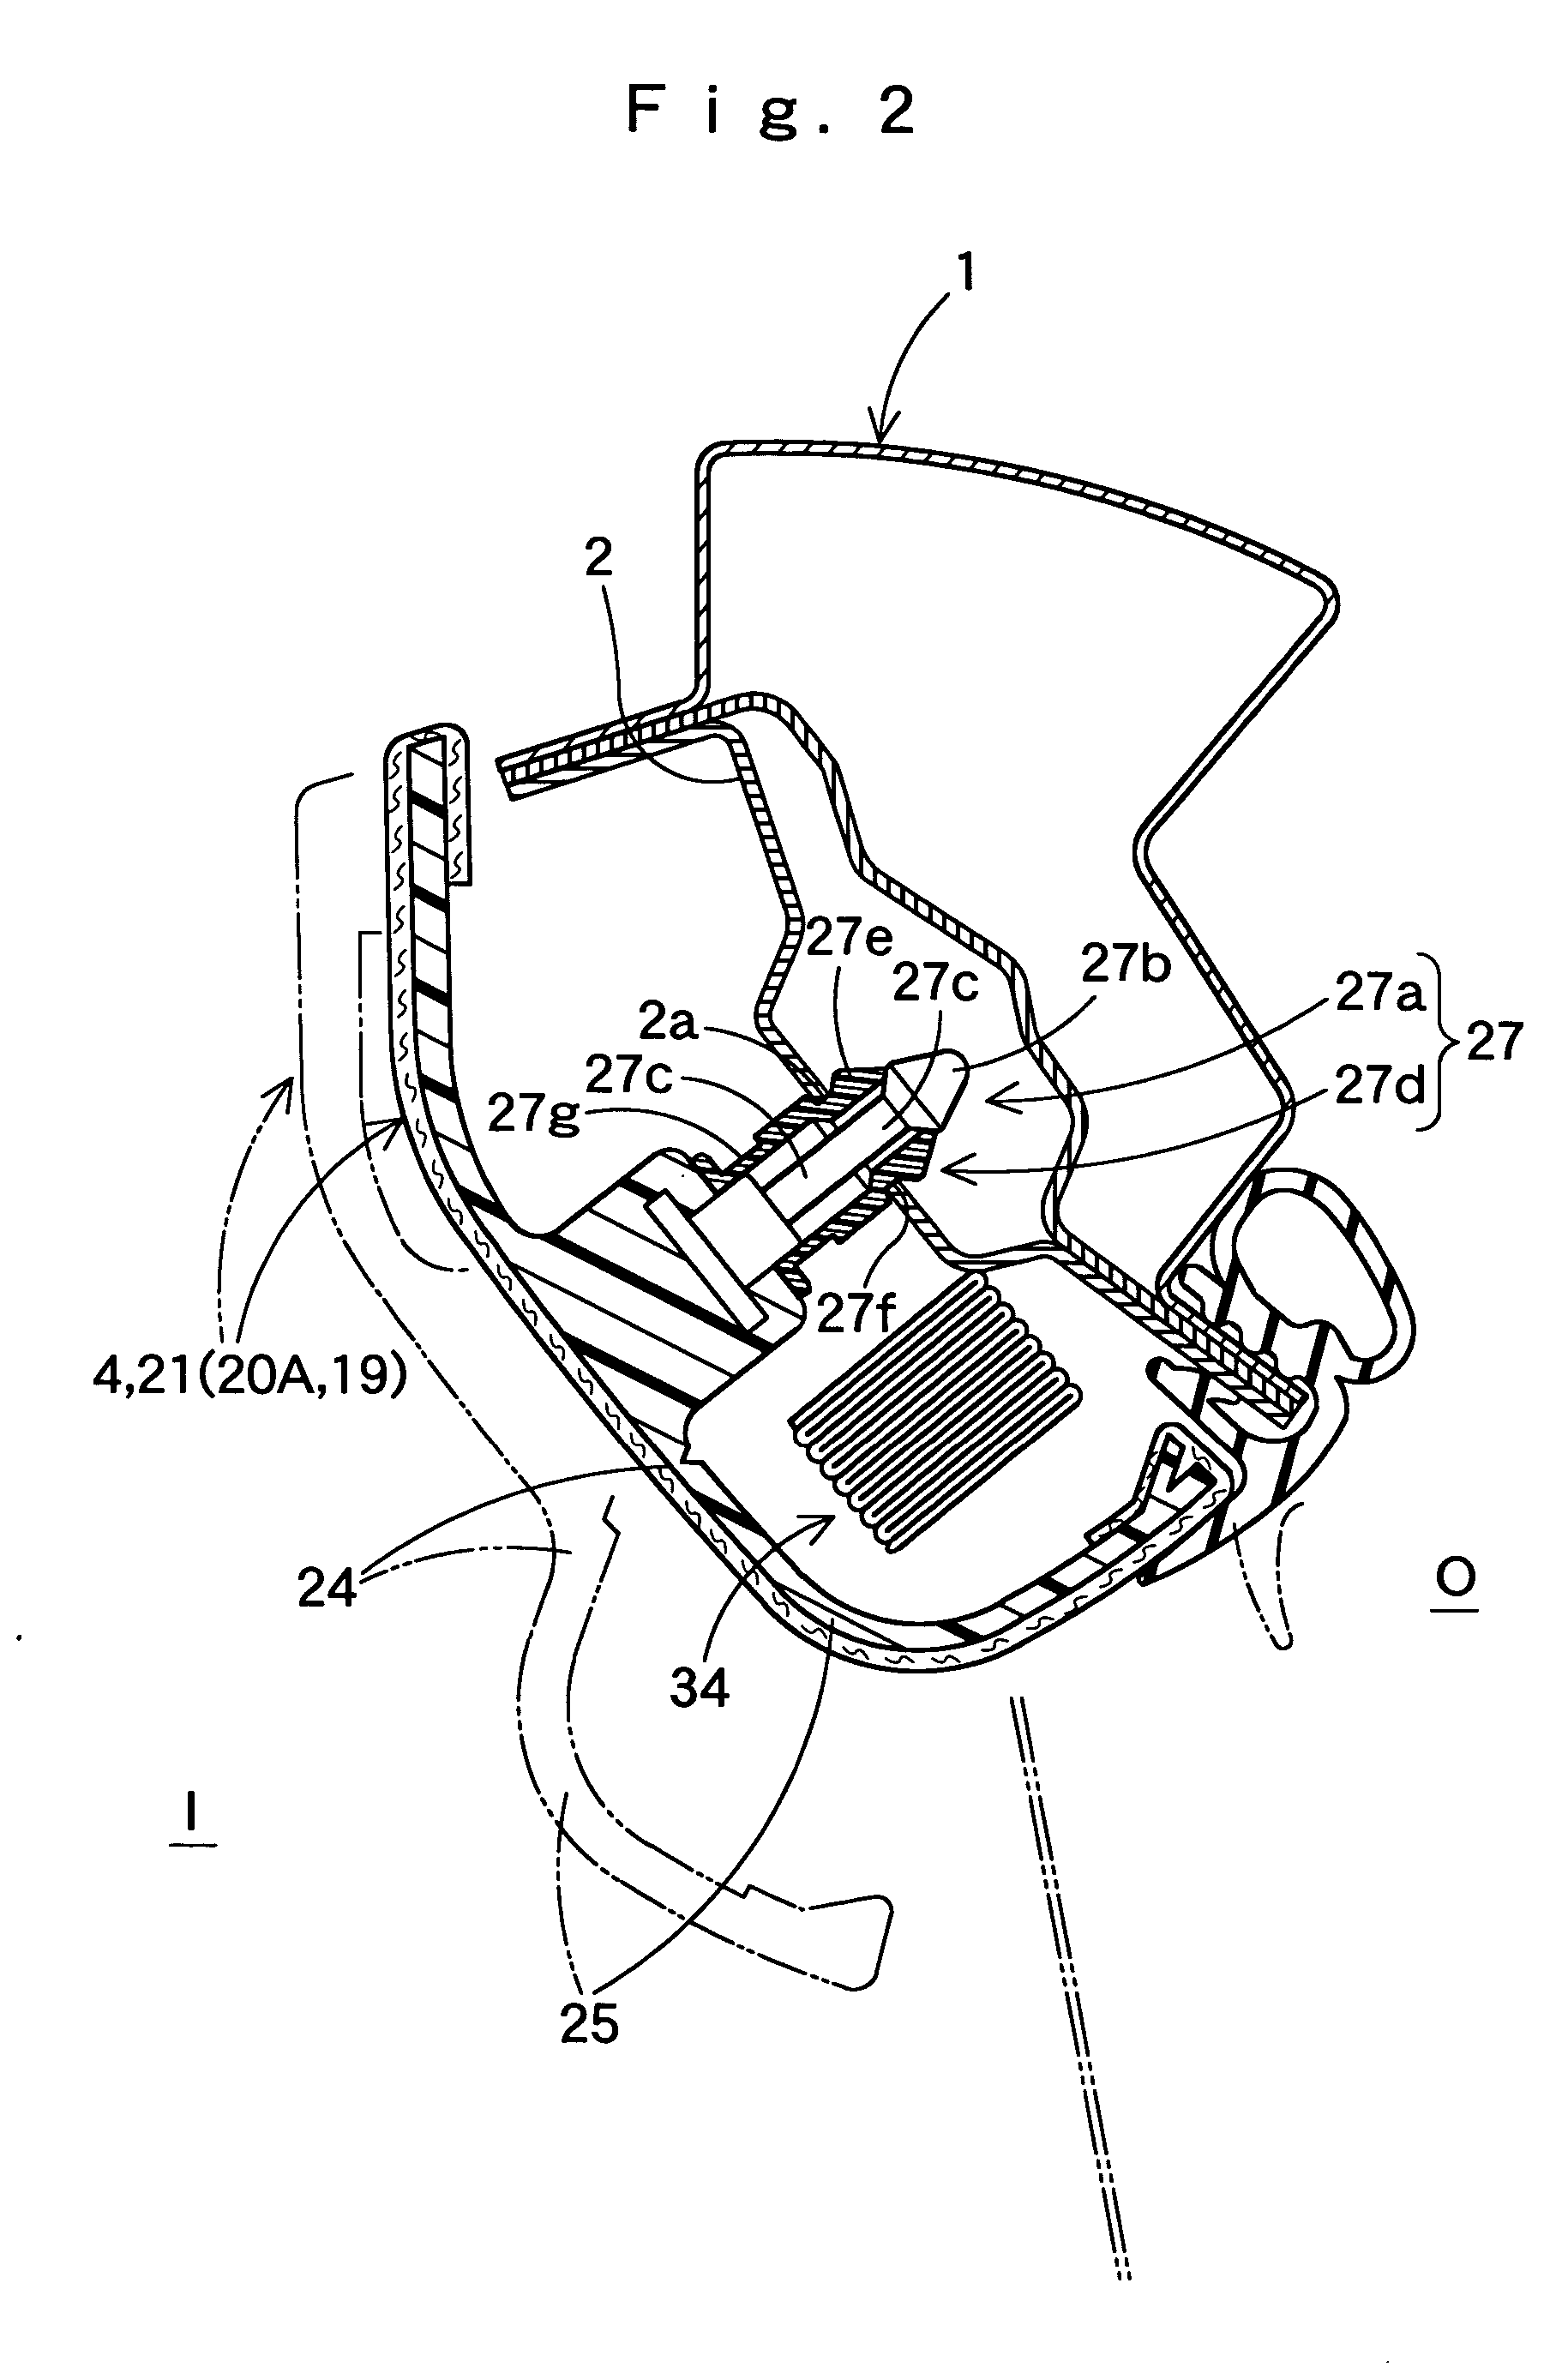 Head-protecting airbag device